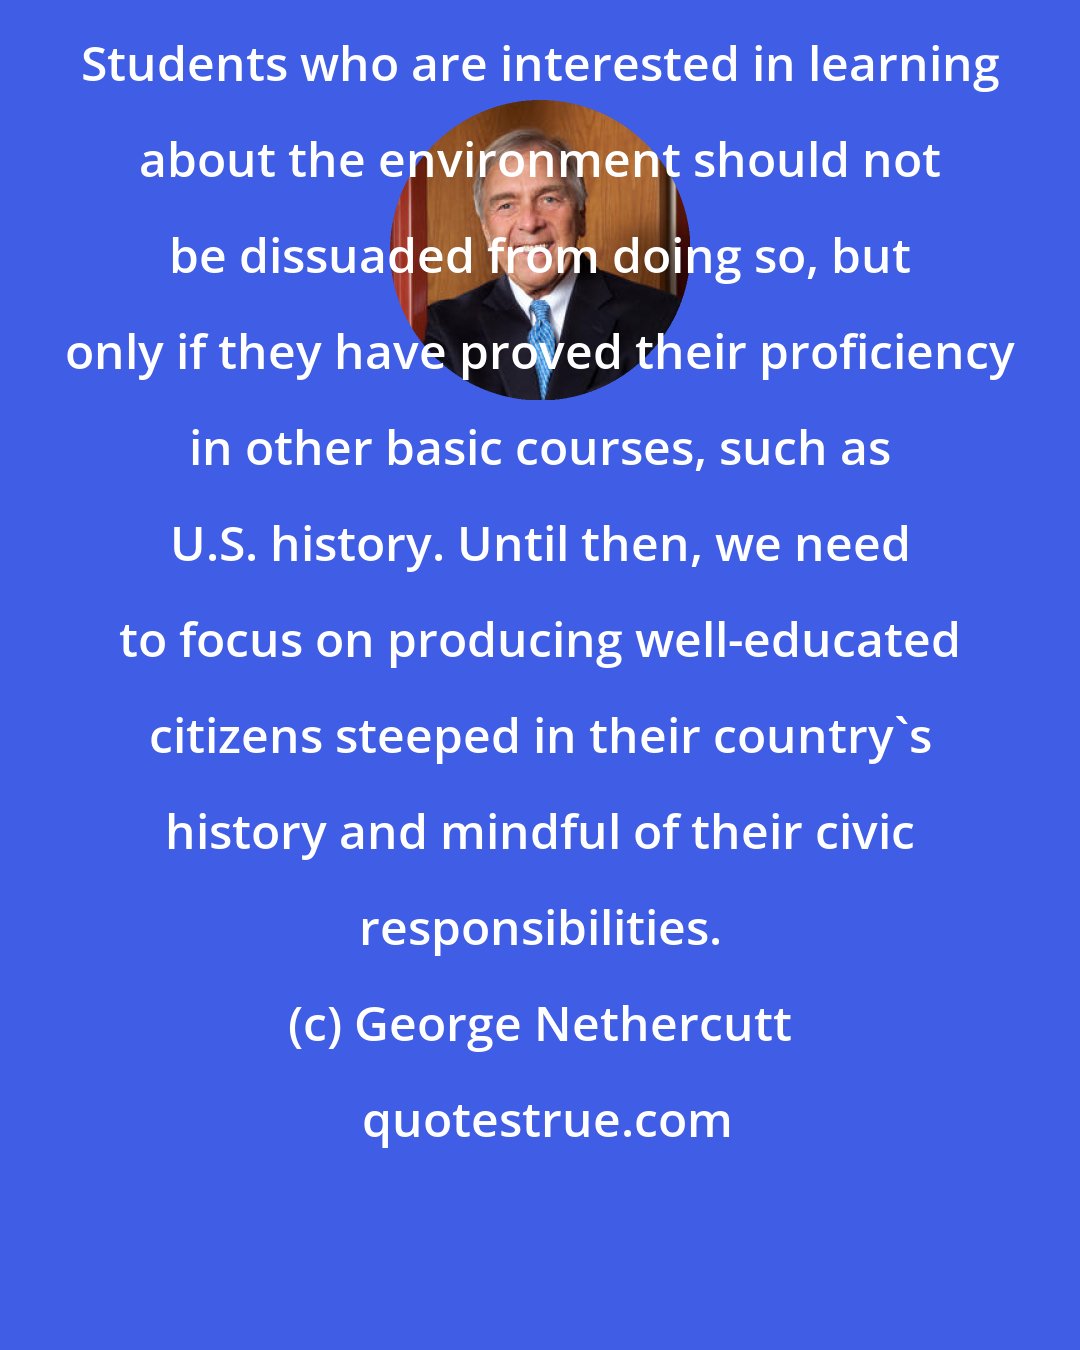 George Nethercutt: Students who are interested in learning about the environment should not be dissuaded from doing so, but only if they have proved their proficiency in other basic courses, such as U.S. history. Until then, we need to focus on producing well-educated citizens steeped in their country's history and mindful of their civic responsibilities.